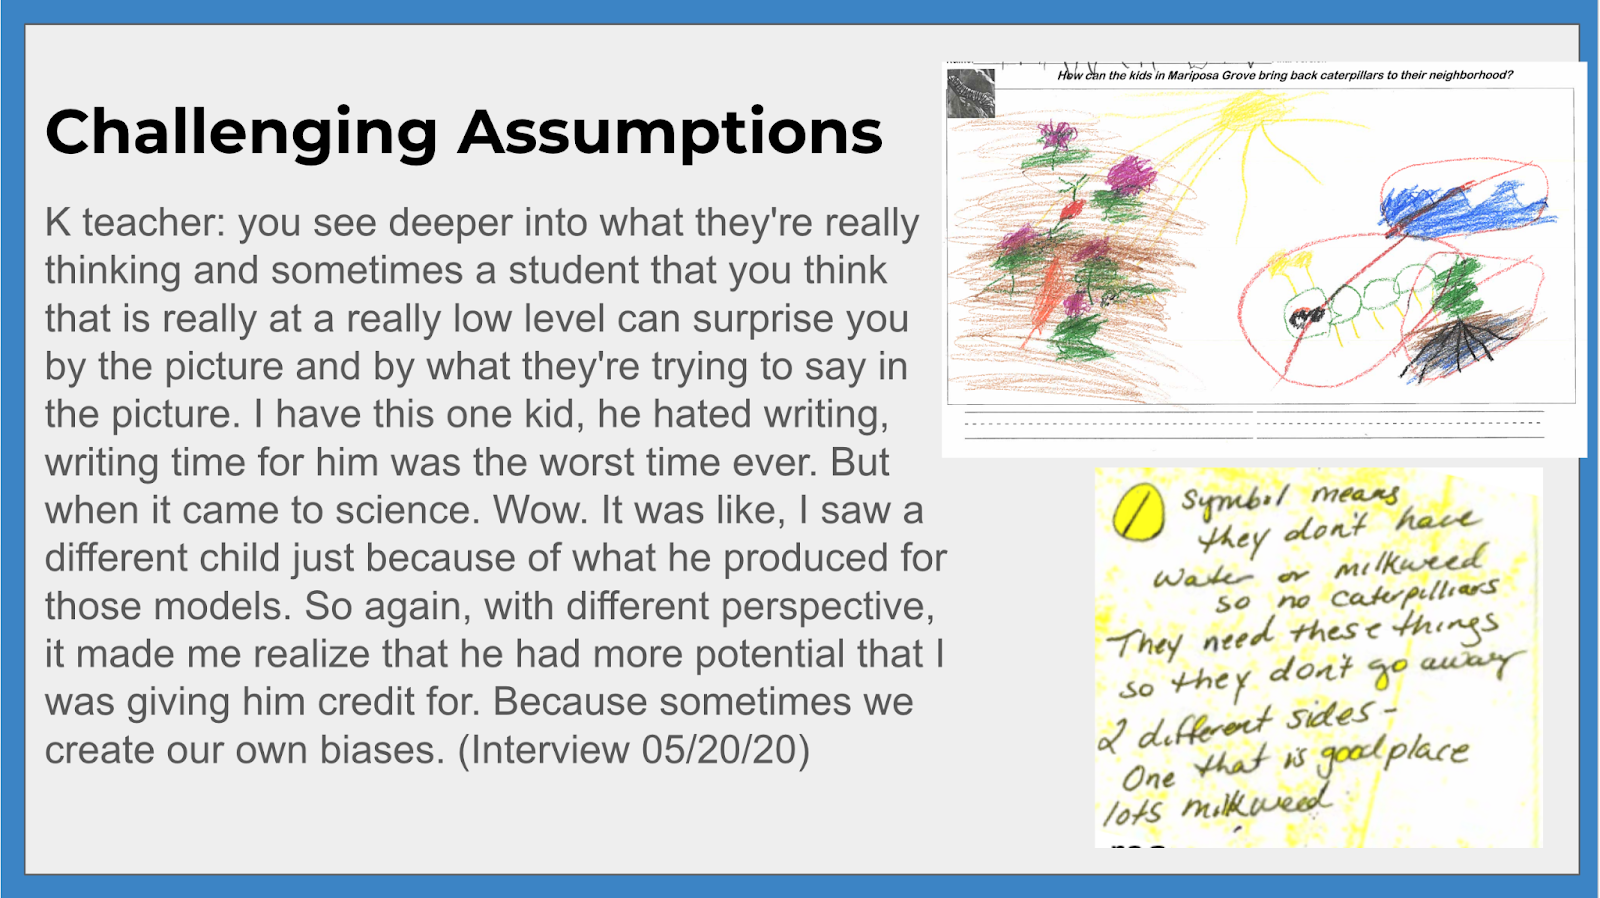 Challenging assumptions K teacher: you see deeper into what they're really thinking and sometimes a student that you think that is really at a really low level can surprise you by the picture and by what they're trying to say in the picture. I have this one kid, he hated writing, writing time for him was the worst time ever. But when it came to science. Wow. It was like, I saw a different child just because of what he produced for those models. So again, with different perspective, it made me realize that he had more potential that I was giving him for. Because sometimes we create our own biases. (Interview 05/20/20). The student's model is also shown as well as a description of the model and what symbols in their model meant.